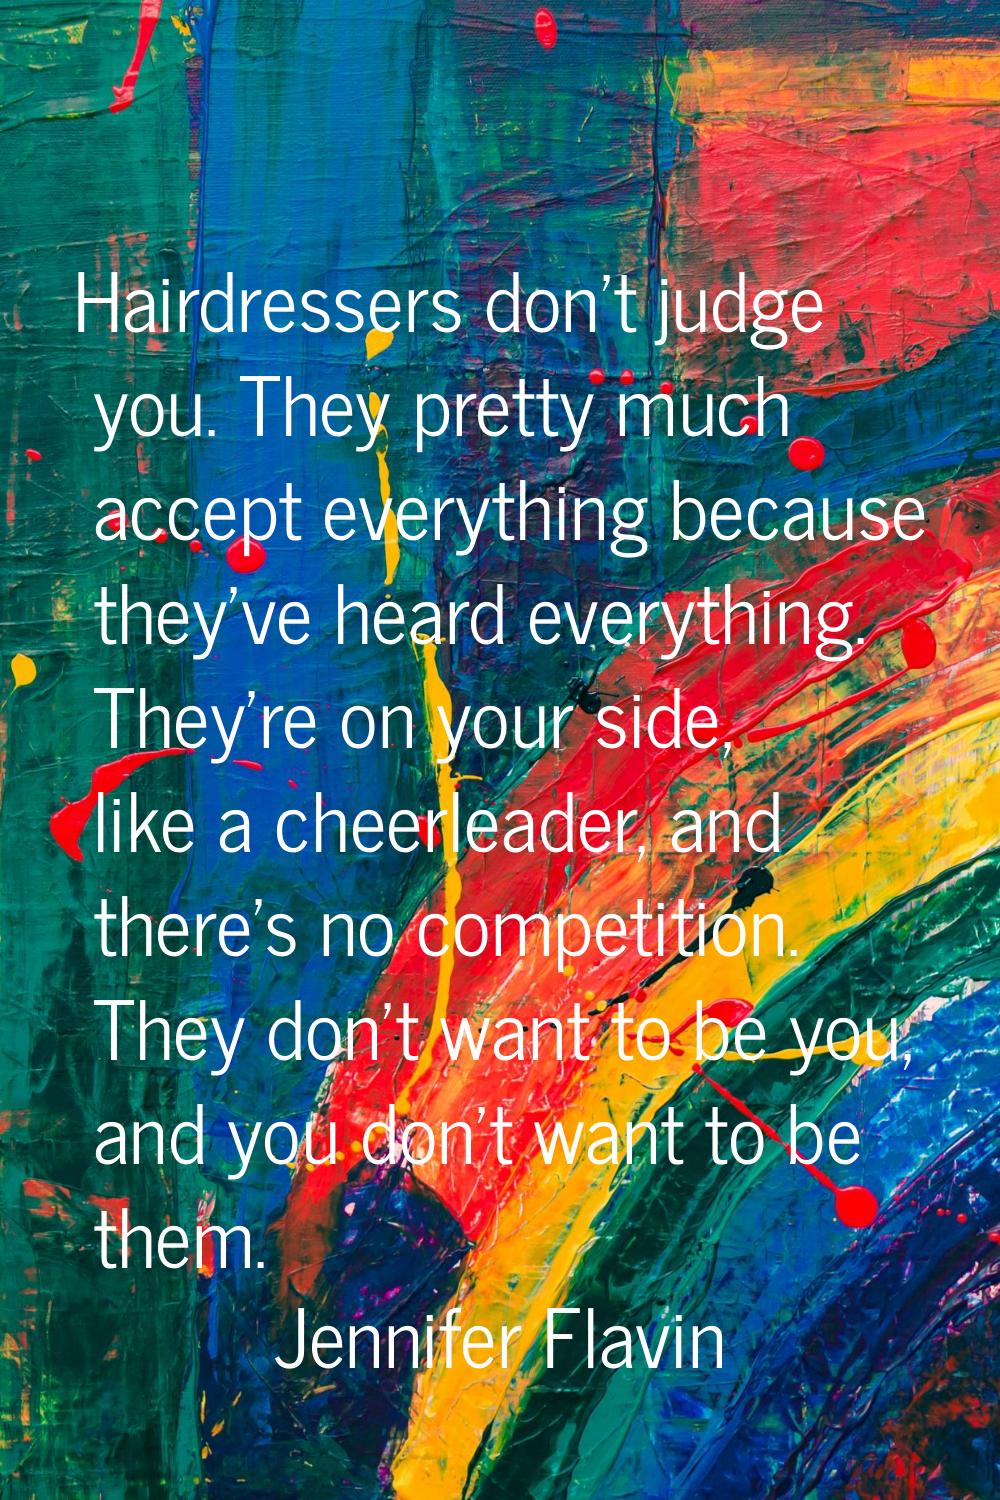 Hairdressers don't judge you. They pretty much accept everything because they've heard everything. 